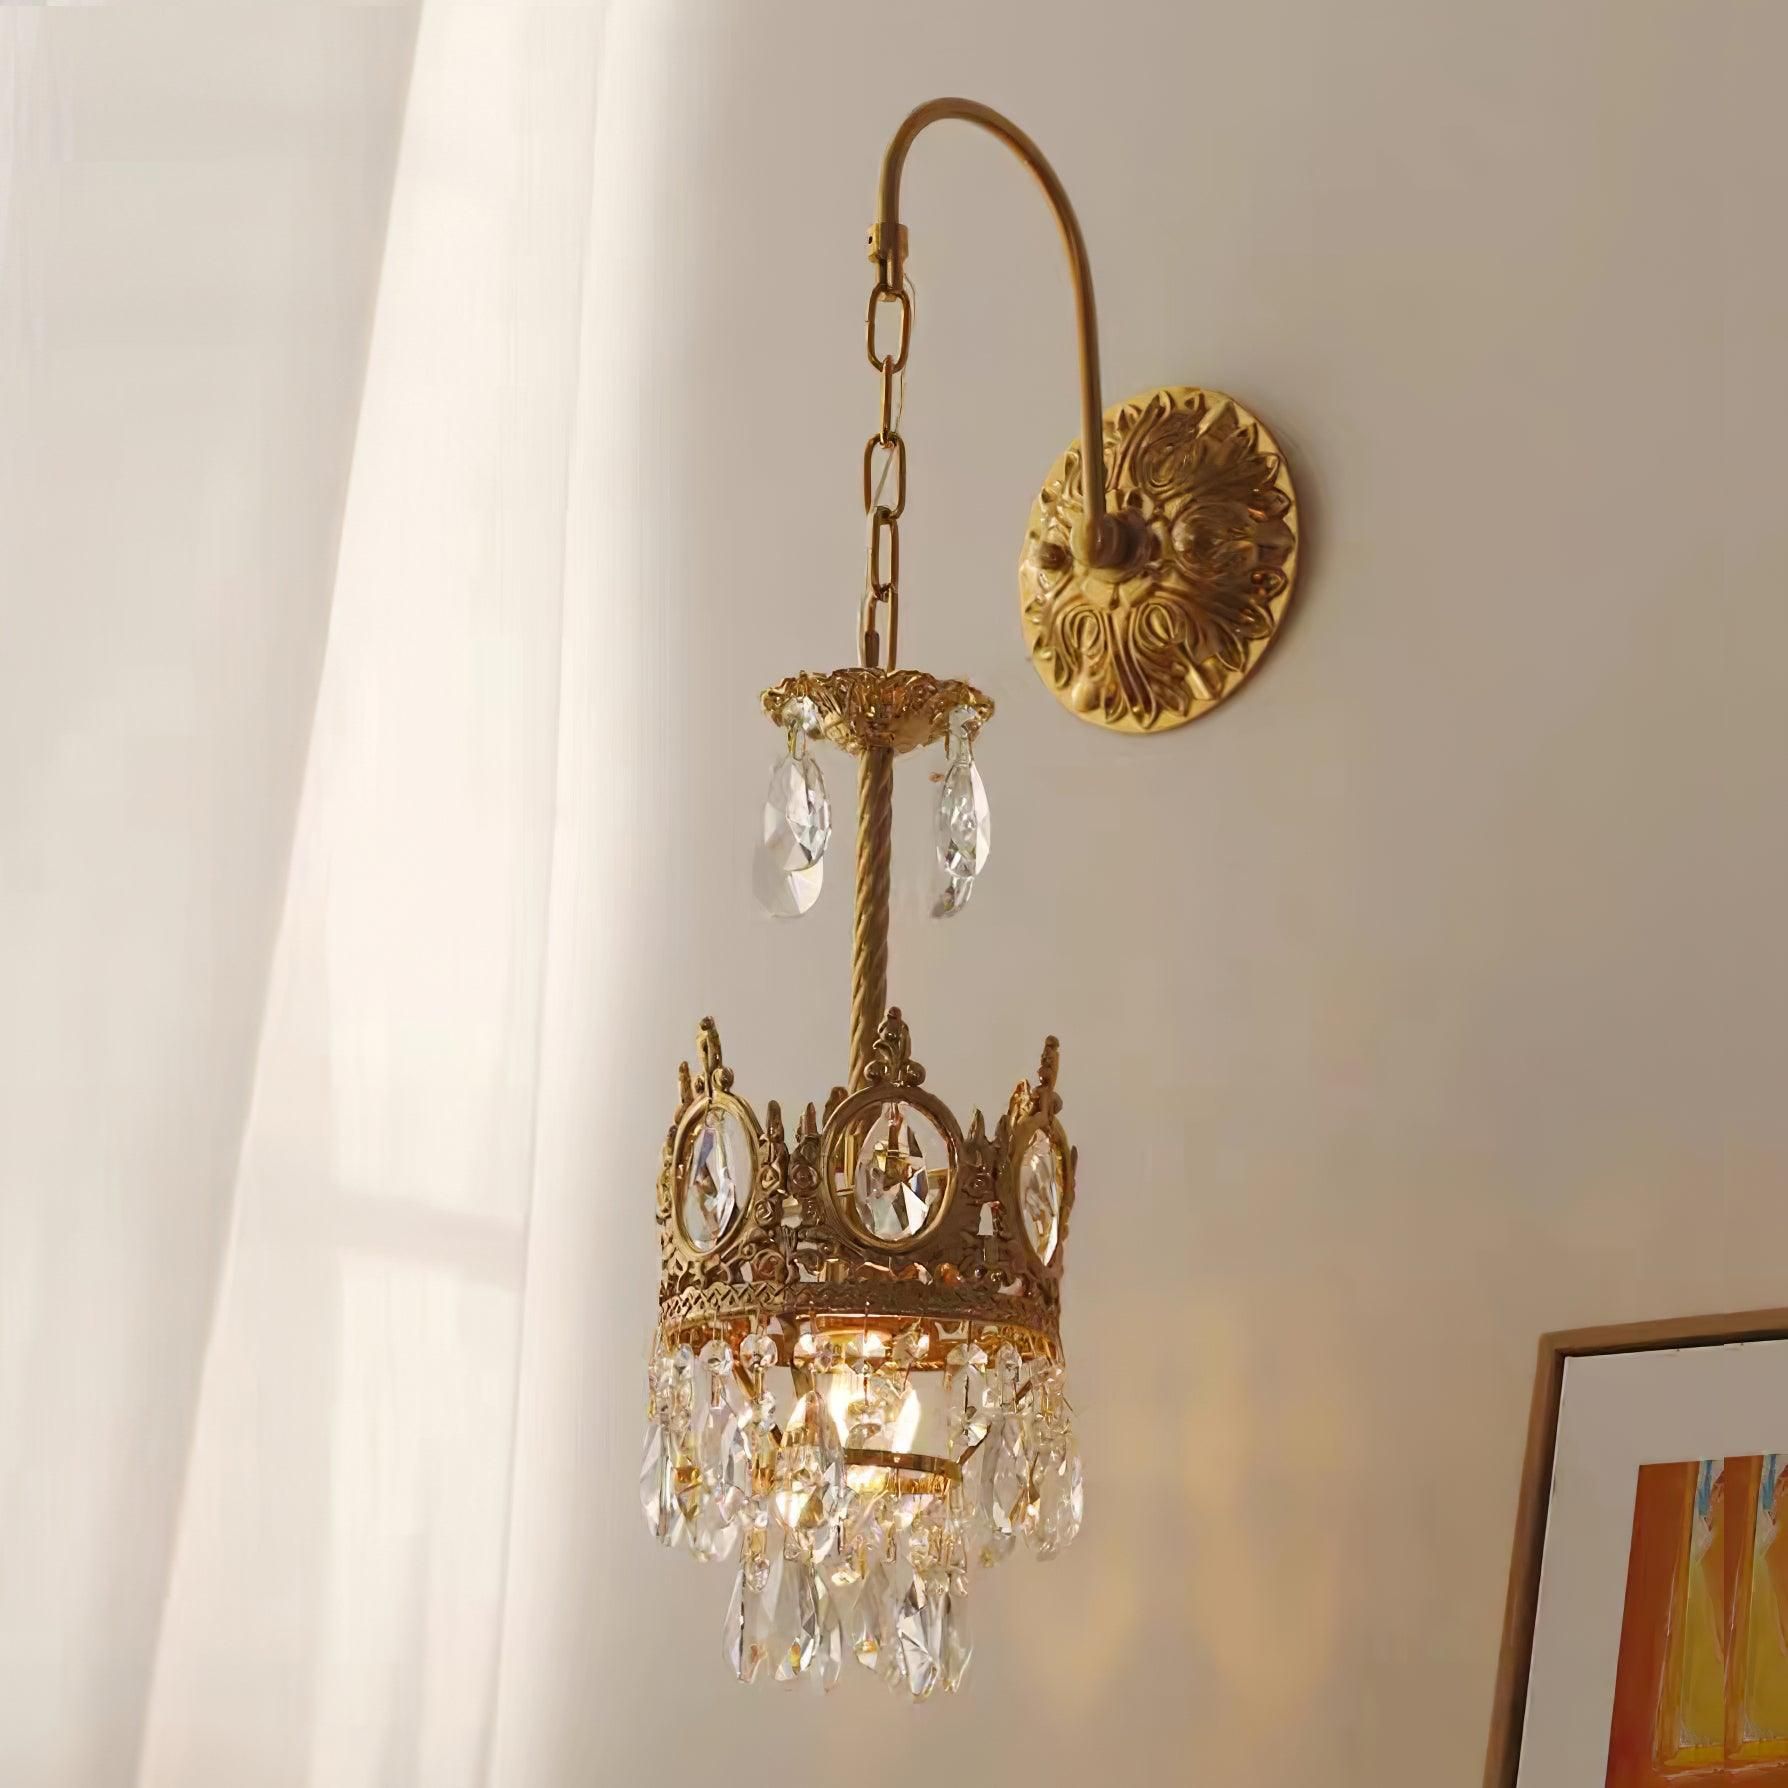 Shine Bright: The Ultimate Guide to Bathroom Chandelier Lighting